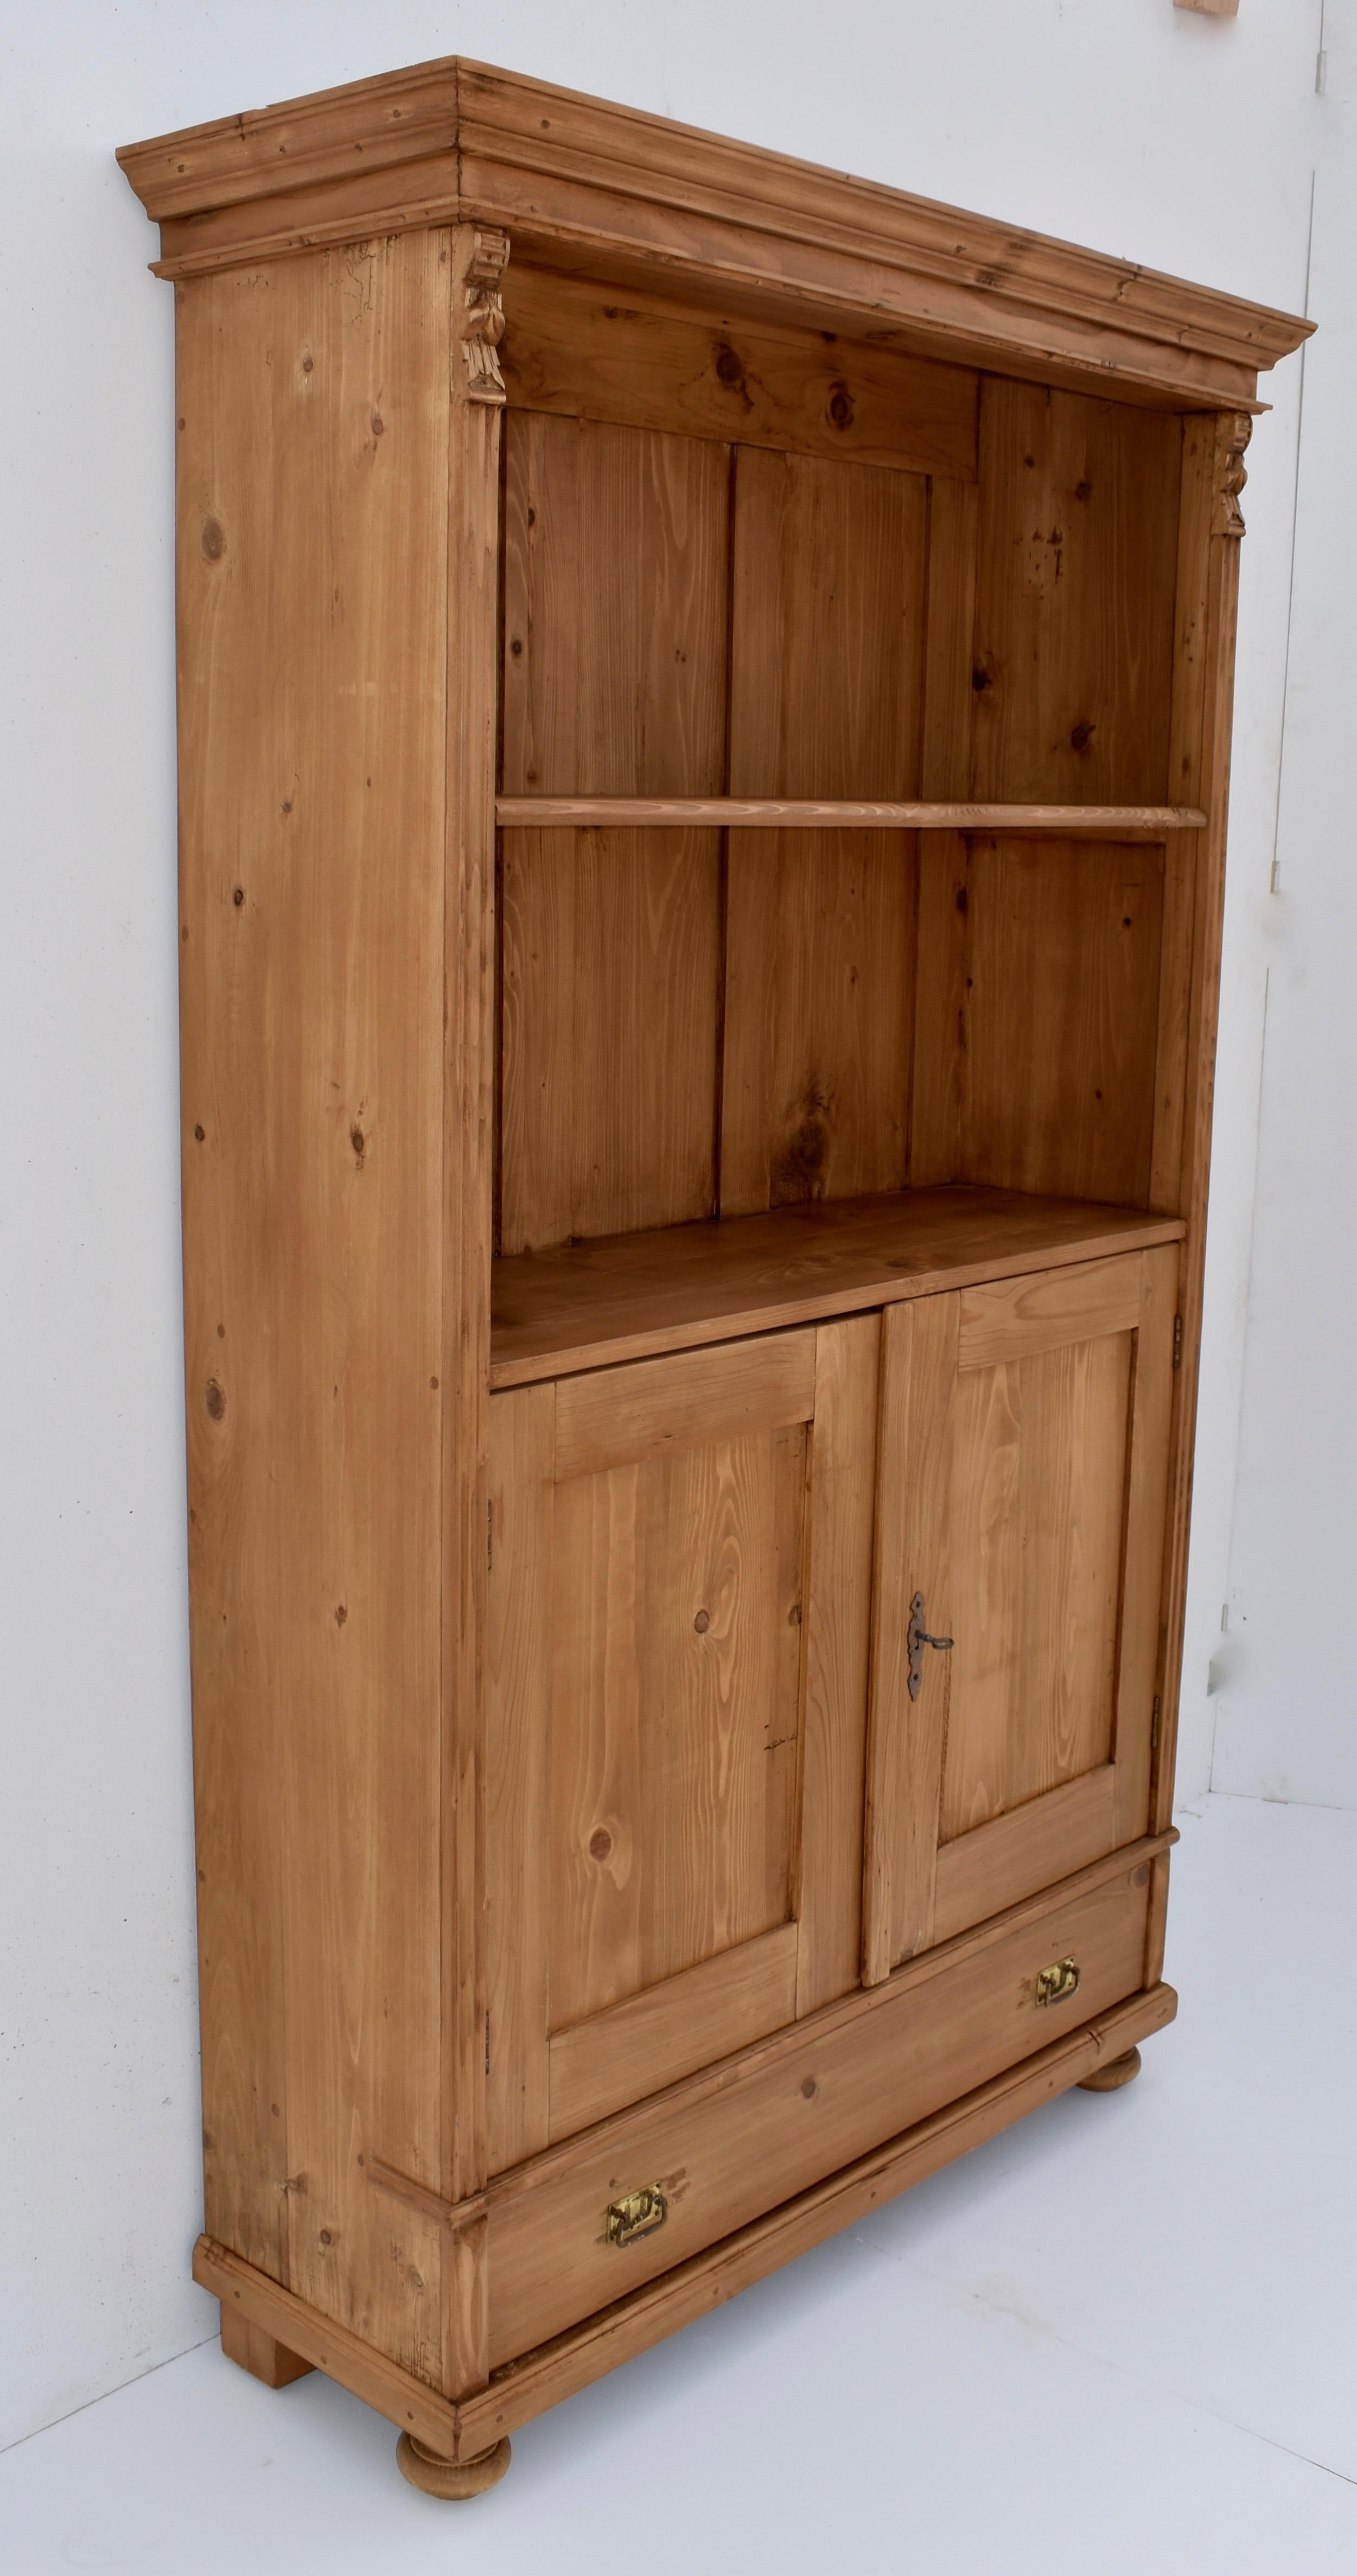 Antique pine bookcases are hard to find so the shell of this piece was provided by a plain vintage armoire. With one board width removed from the sides and the original backboards and crown molding retained; with the doors cut down, and the drawer